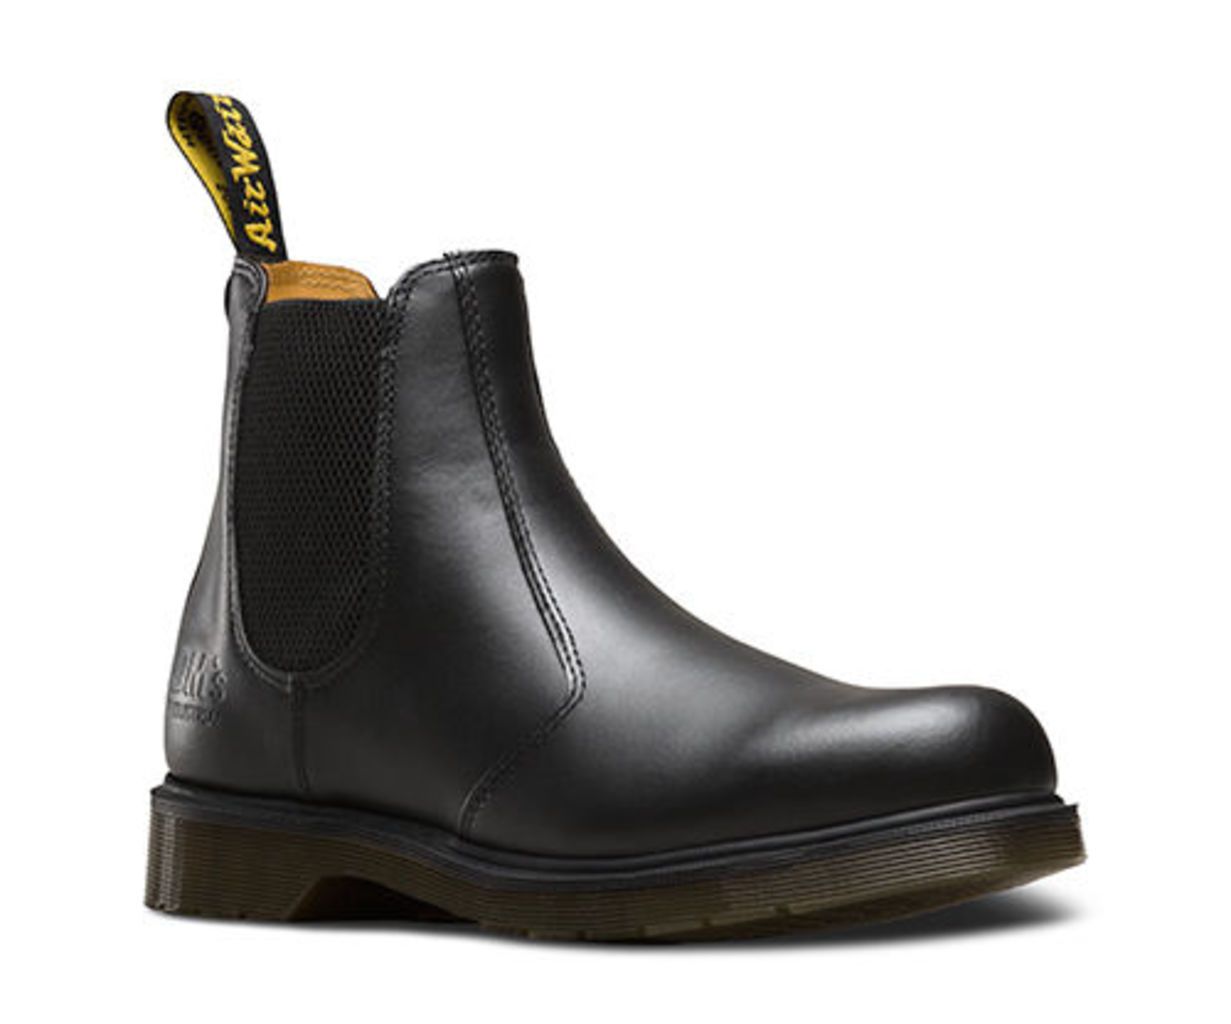 Occupational 8250 Boot